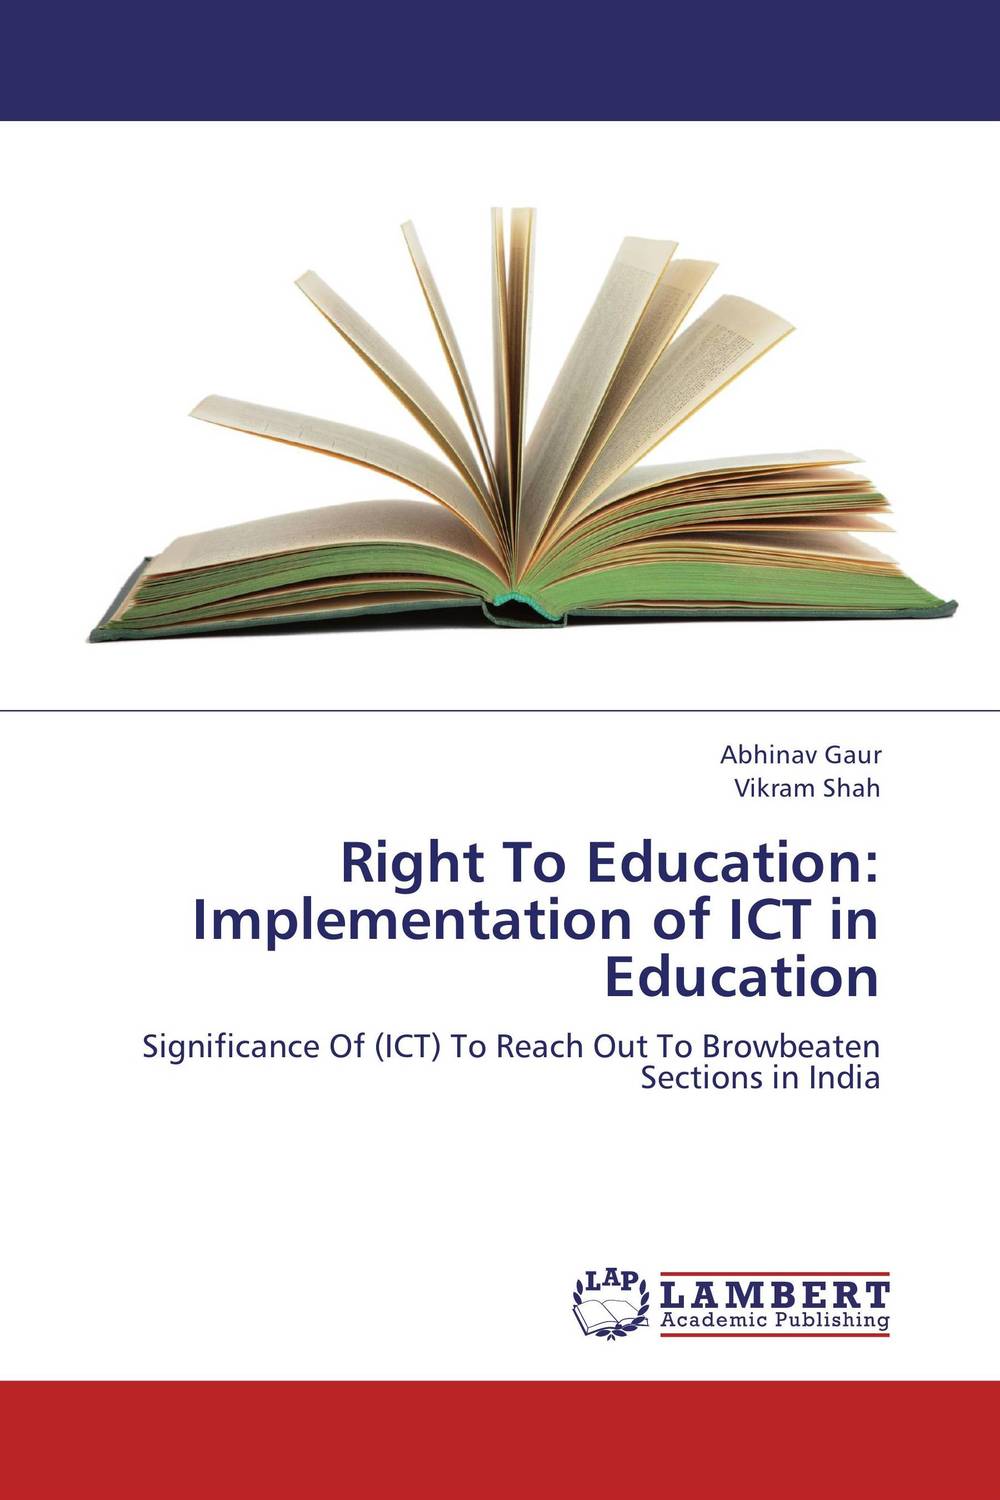 Right To Education: Implementation of ICT in Education